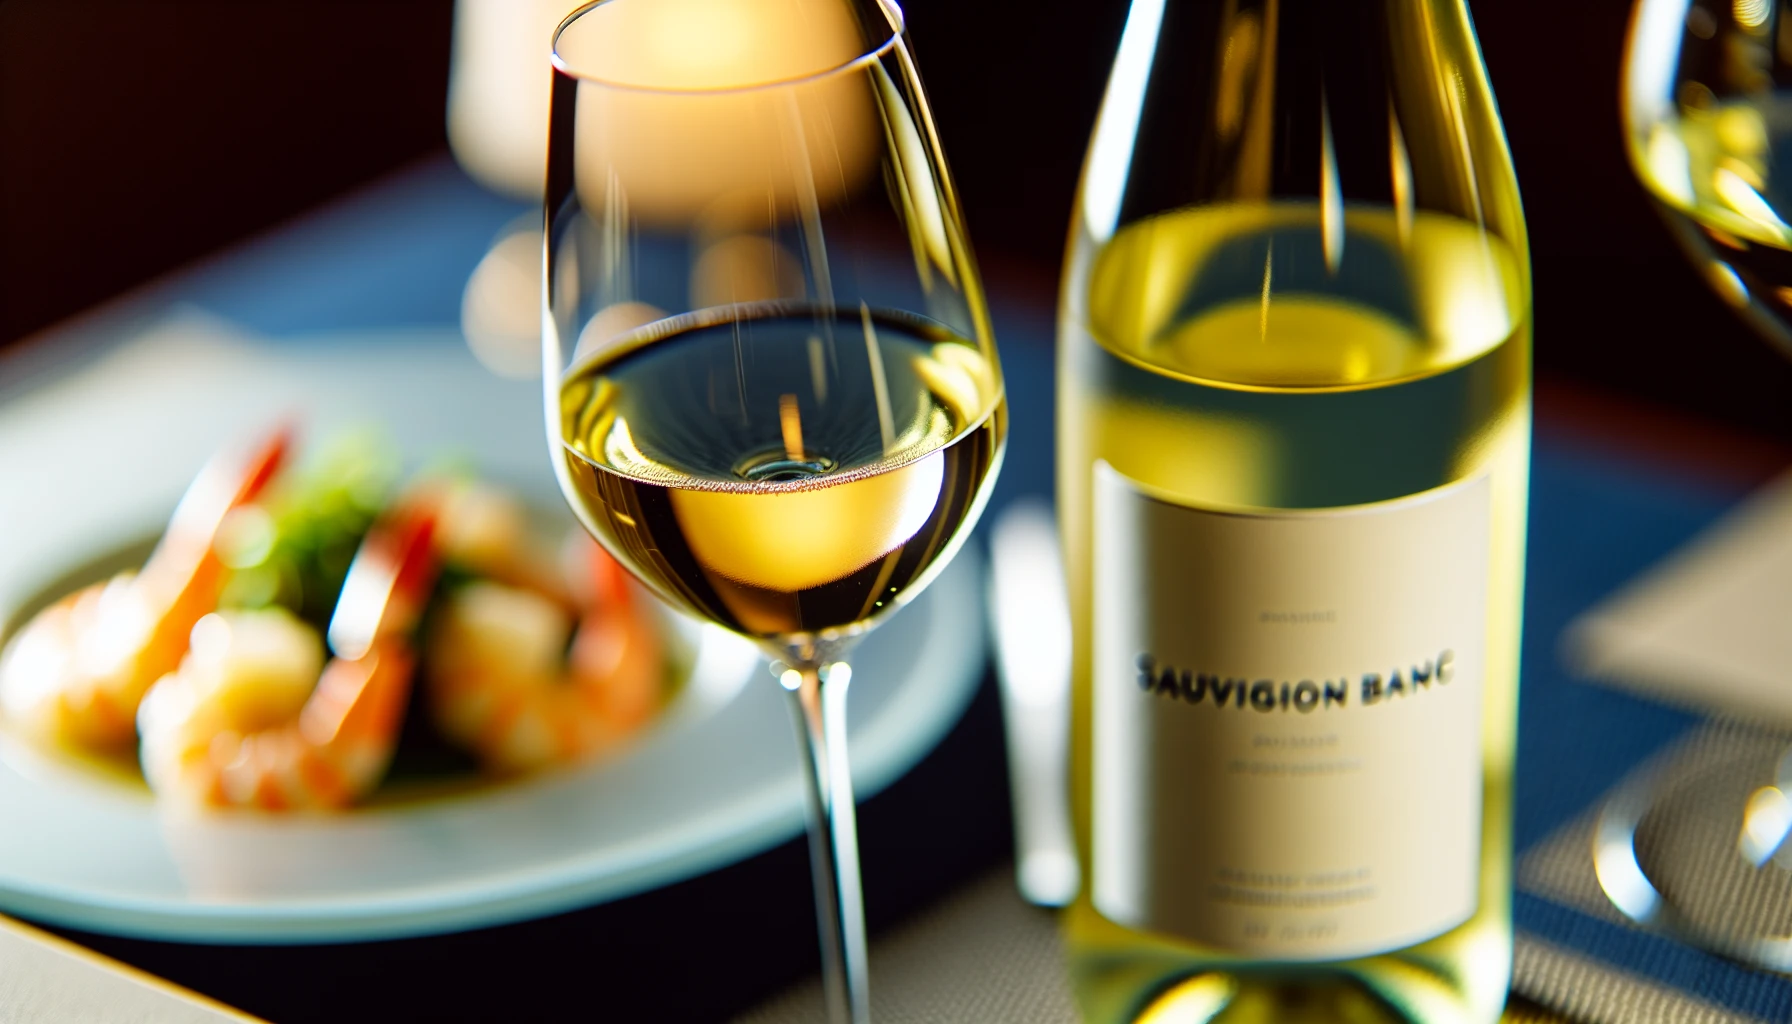 A bottle and glass of Sauvignon Blanc, perfect for pairing with shrimp scampi